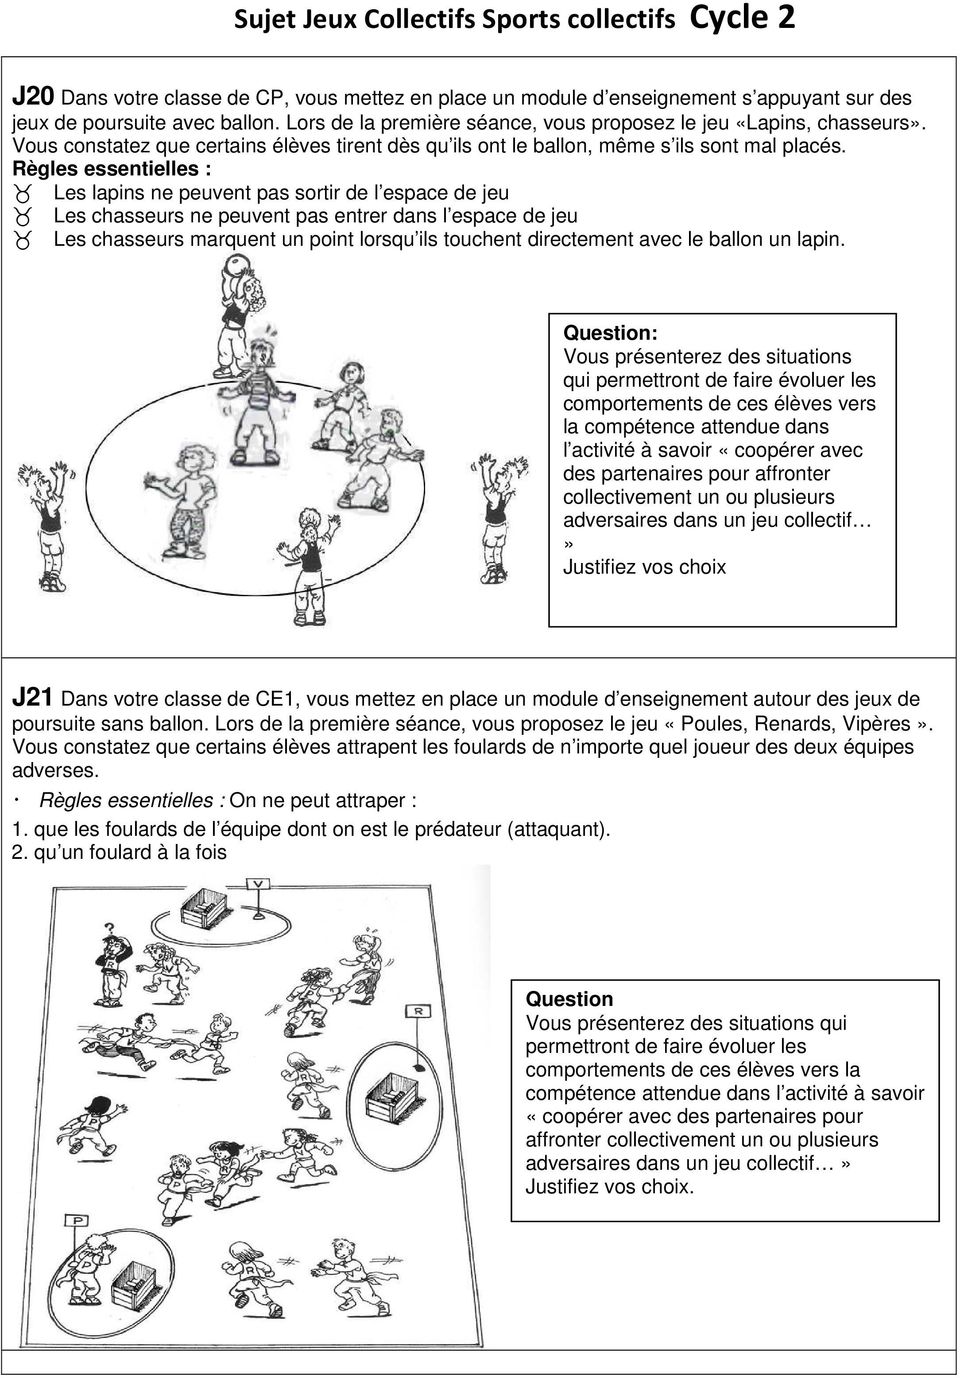 Sujet Jeux Collectifs Sports Collectifs Cycle 1 Pdf Free Download